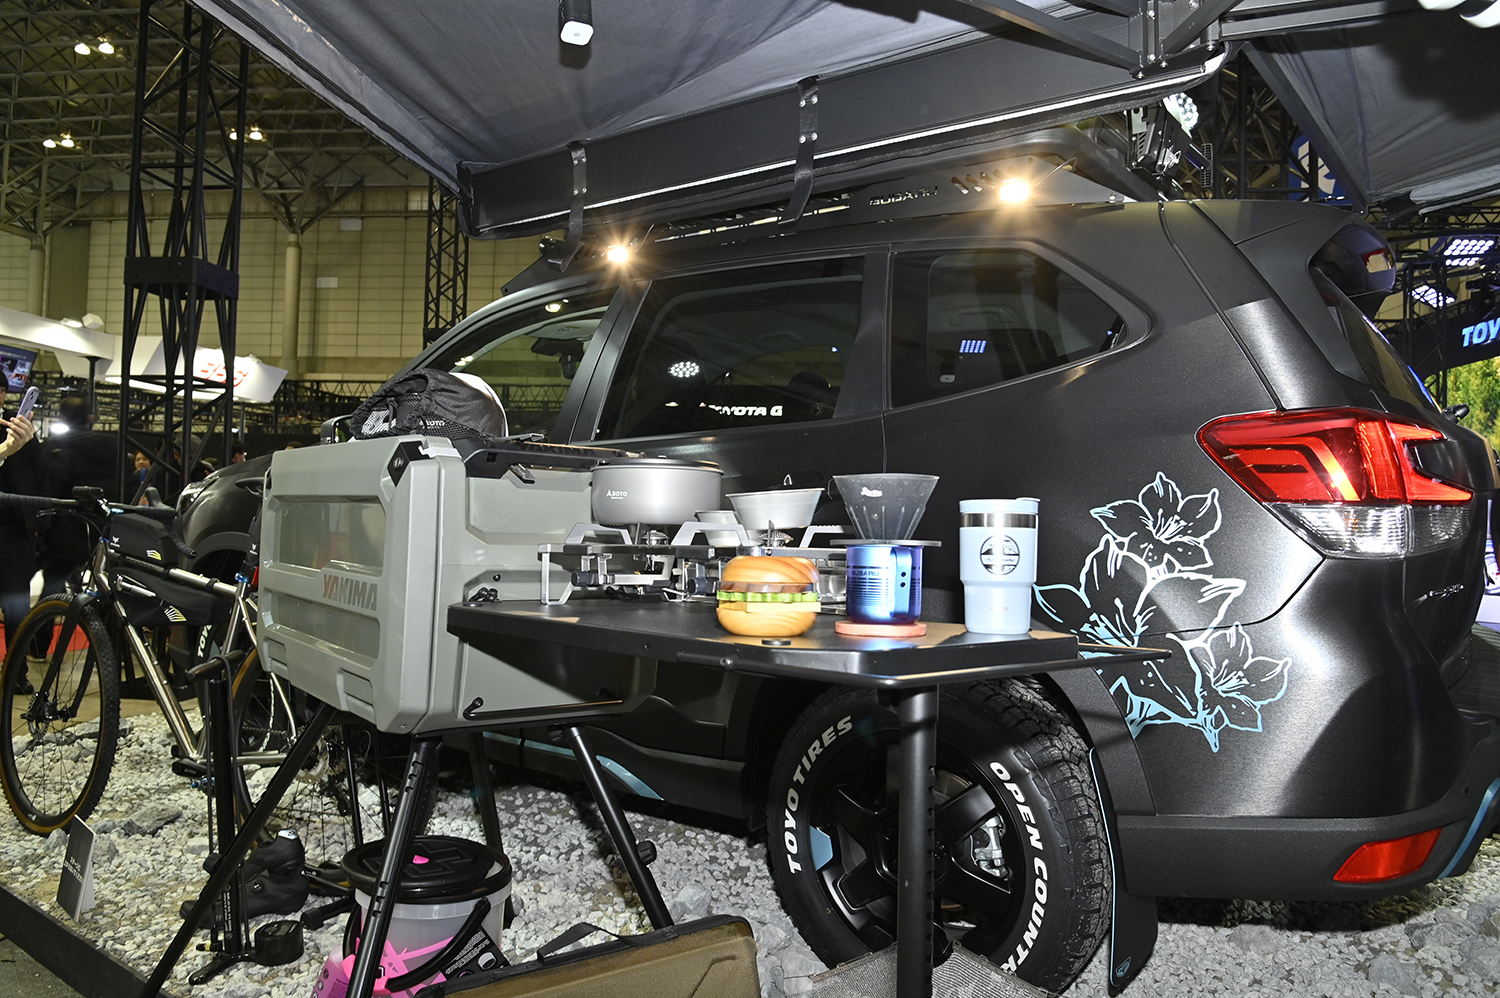 「FORESTER BOOST GEAR PACKAGE」のサイドビュー